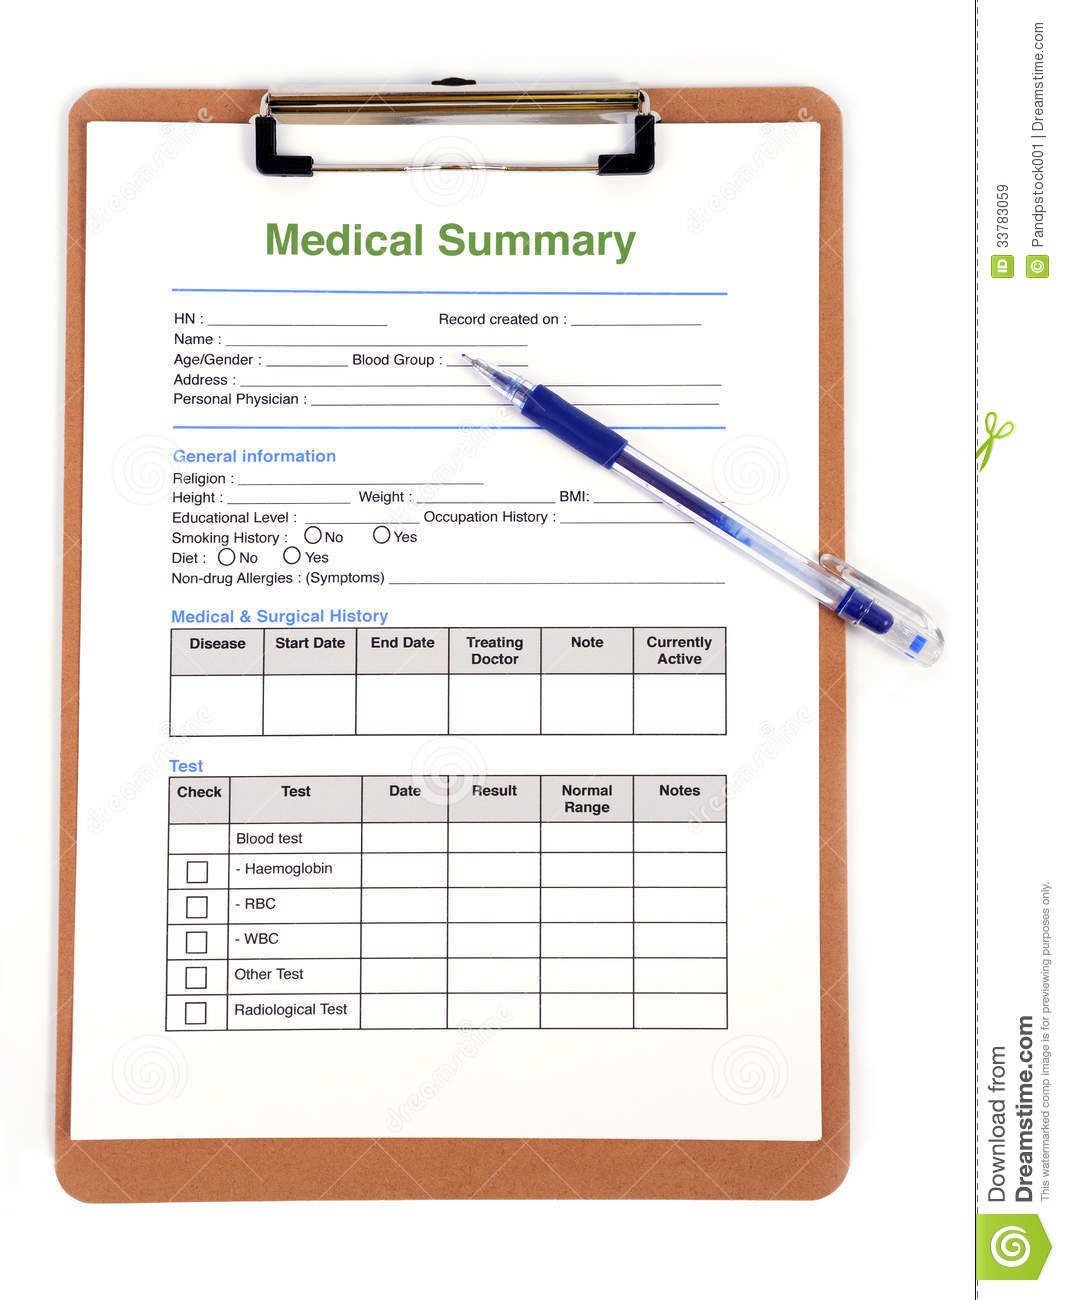 Medical Form Royalty Free Stock Images Image: 33783059